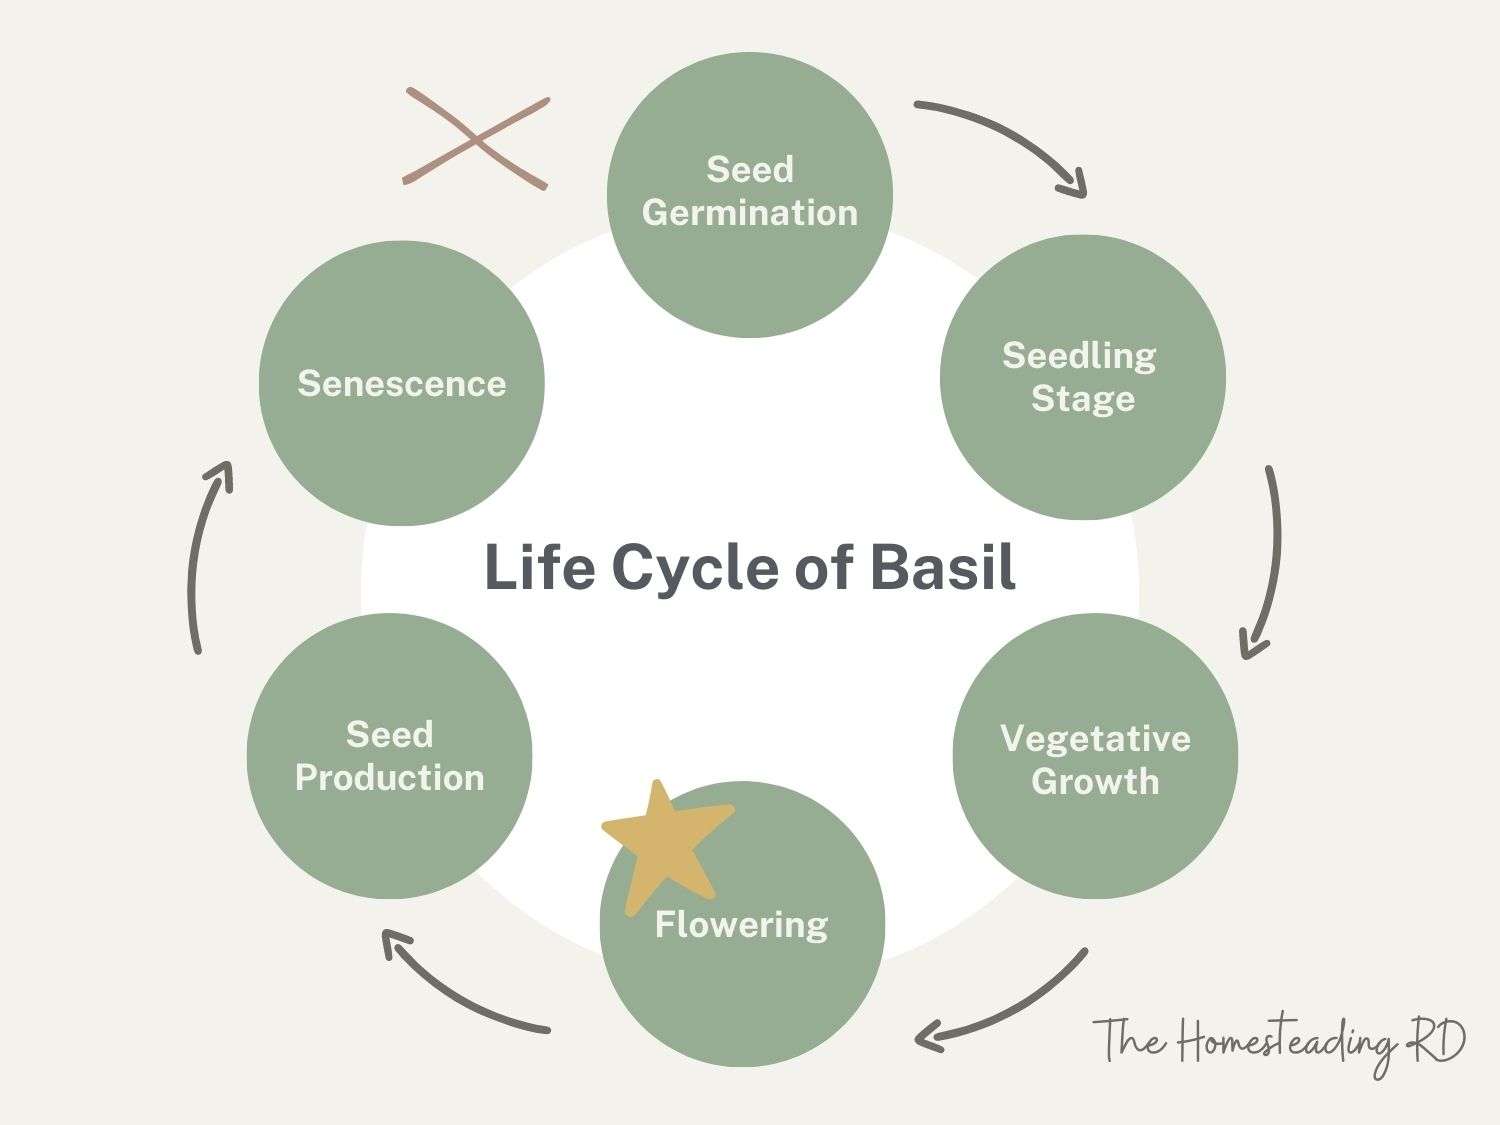 A graphic showing the life cycle of basil